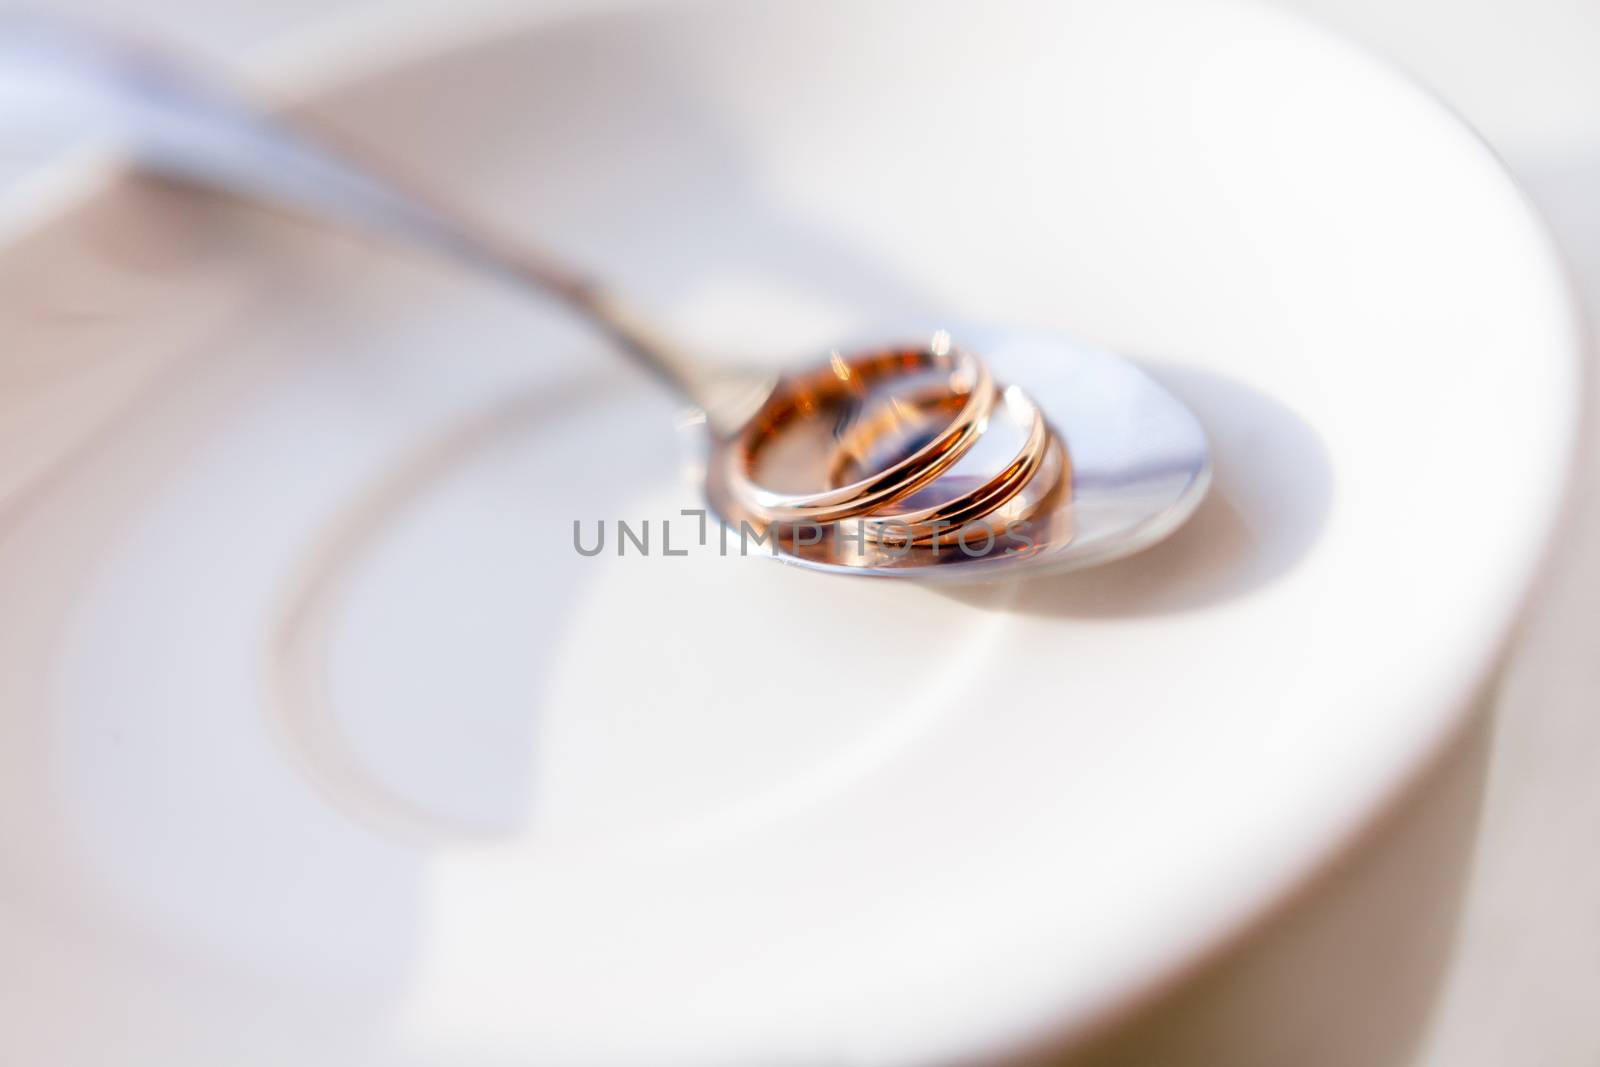 Golden wedding rings on shiny spoon. Traditional symbol of love and marriage on white plate.